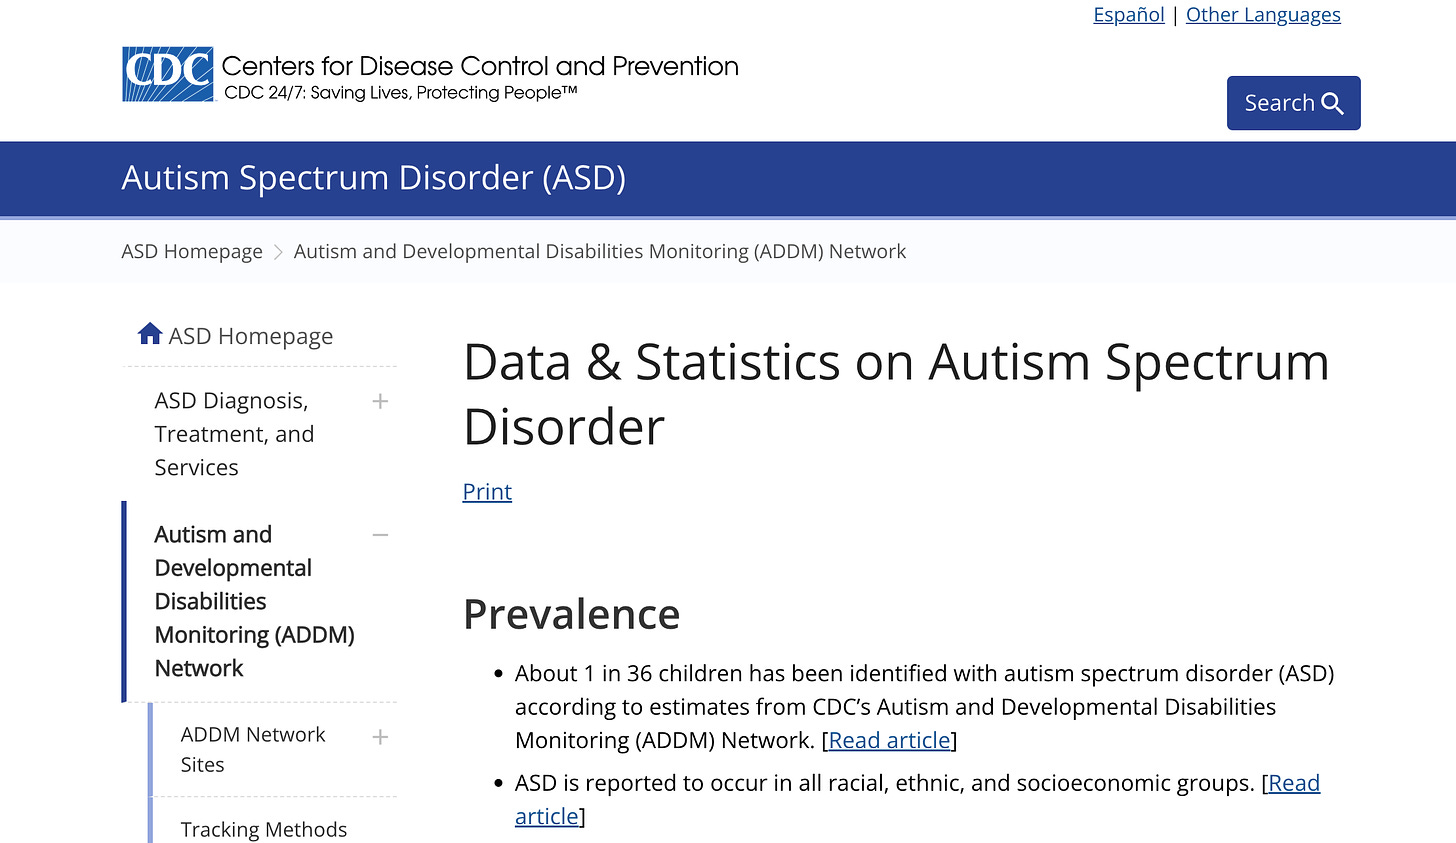 Data & Statistics on Autism Spectrum DisorderPrintPrevalenceAbout 1 in 36 children has been identified with autism spectrum disorder (ASD) according to estimates from the CDC’s Autism and Developmental Disabilities Monitoring (ADDM) Network. [Read article] ASD is reported to occur in all racial, ethnic, and socioeconomic groups. [Read article]